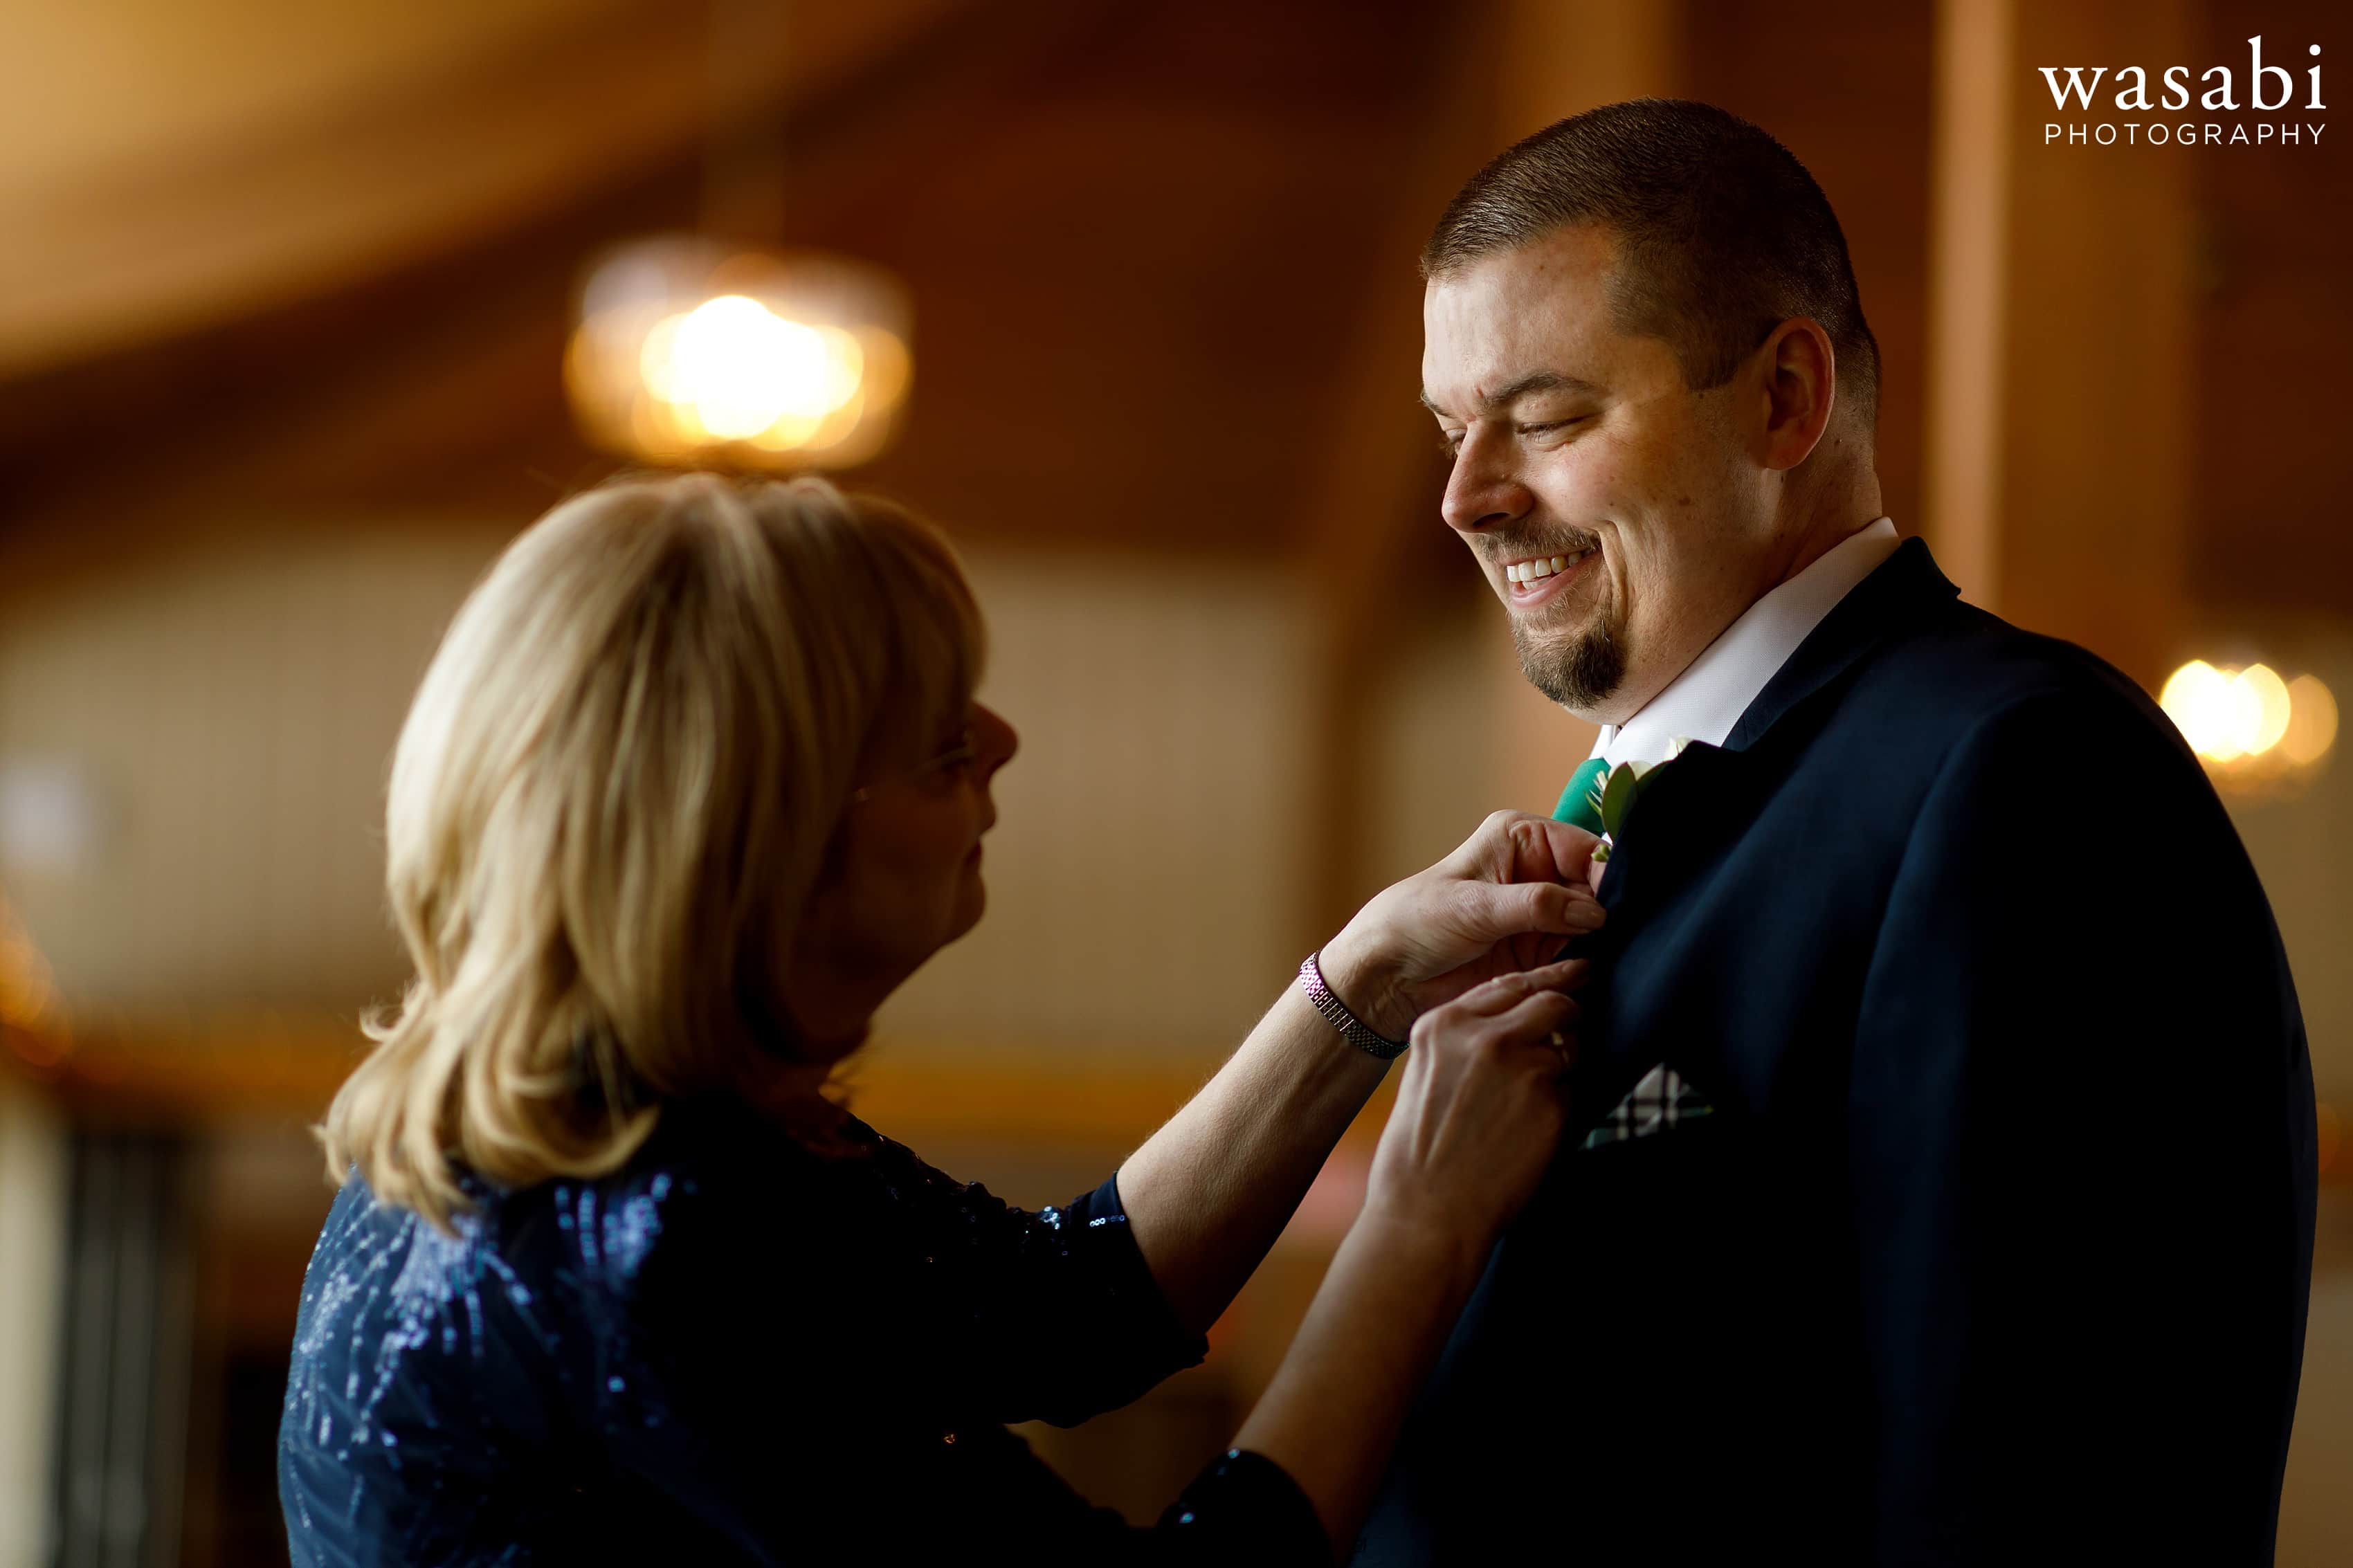 mother of groom puts boutonnière on son's jacket while getting ready for wedding